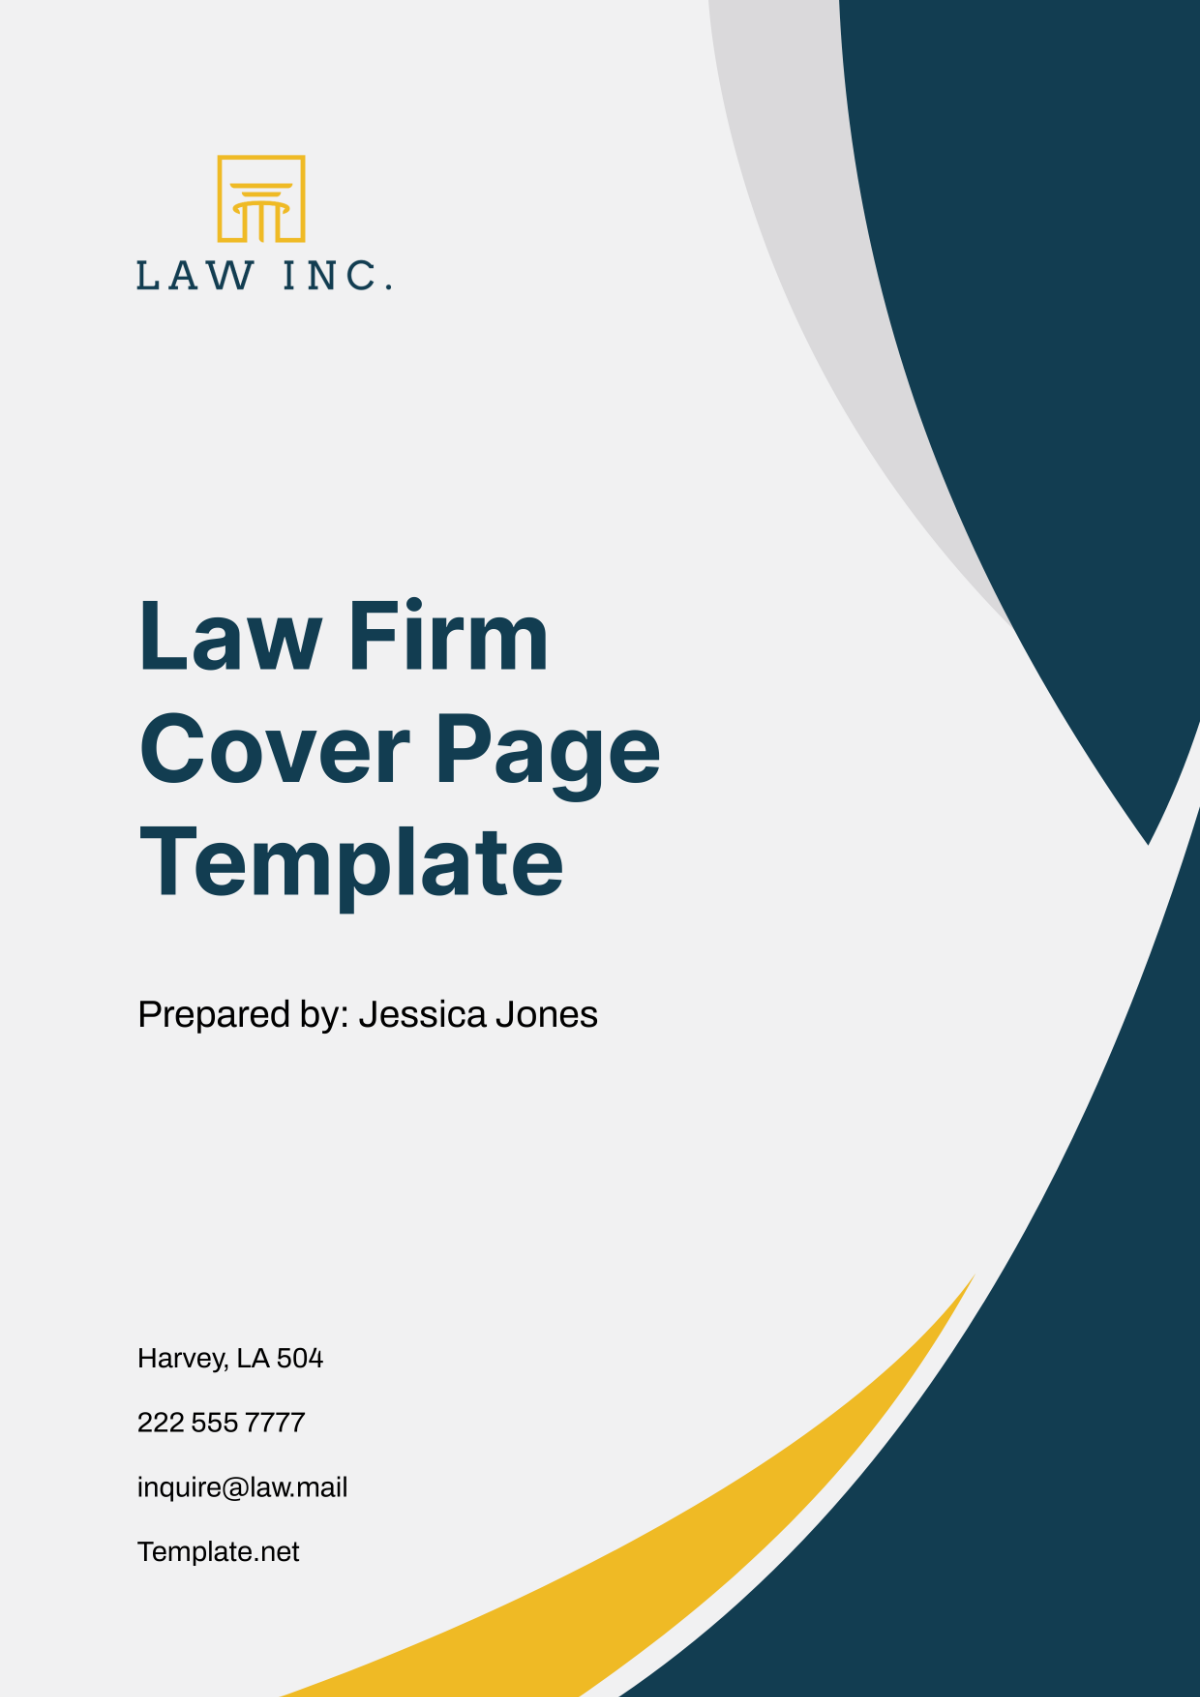 Law Firm Cover Page